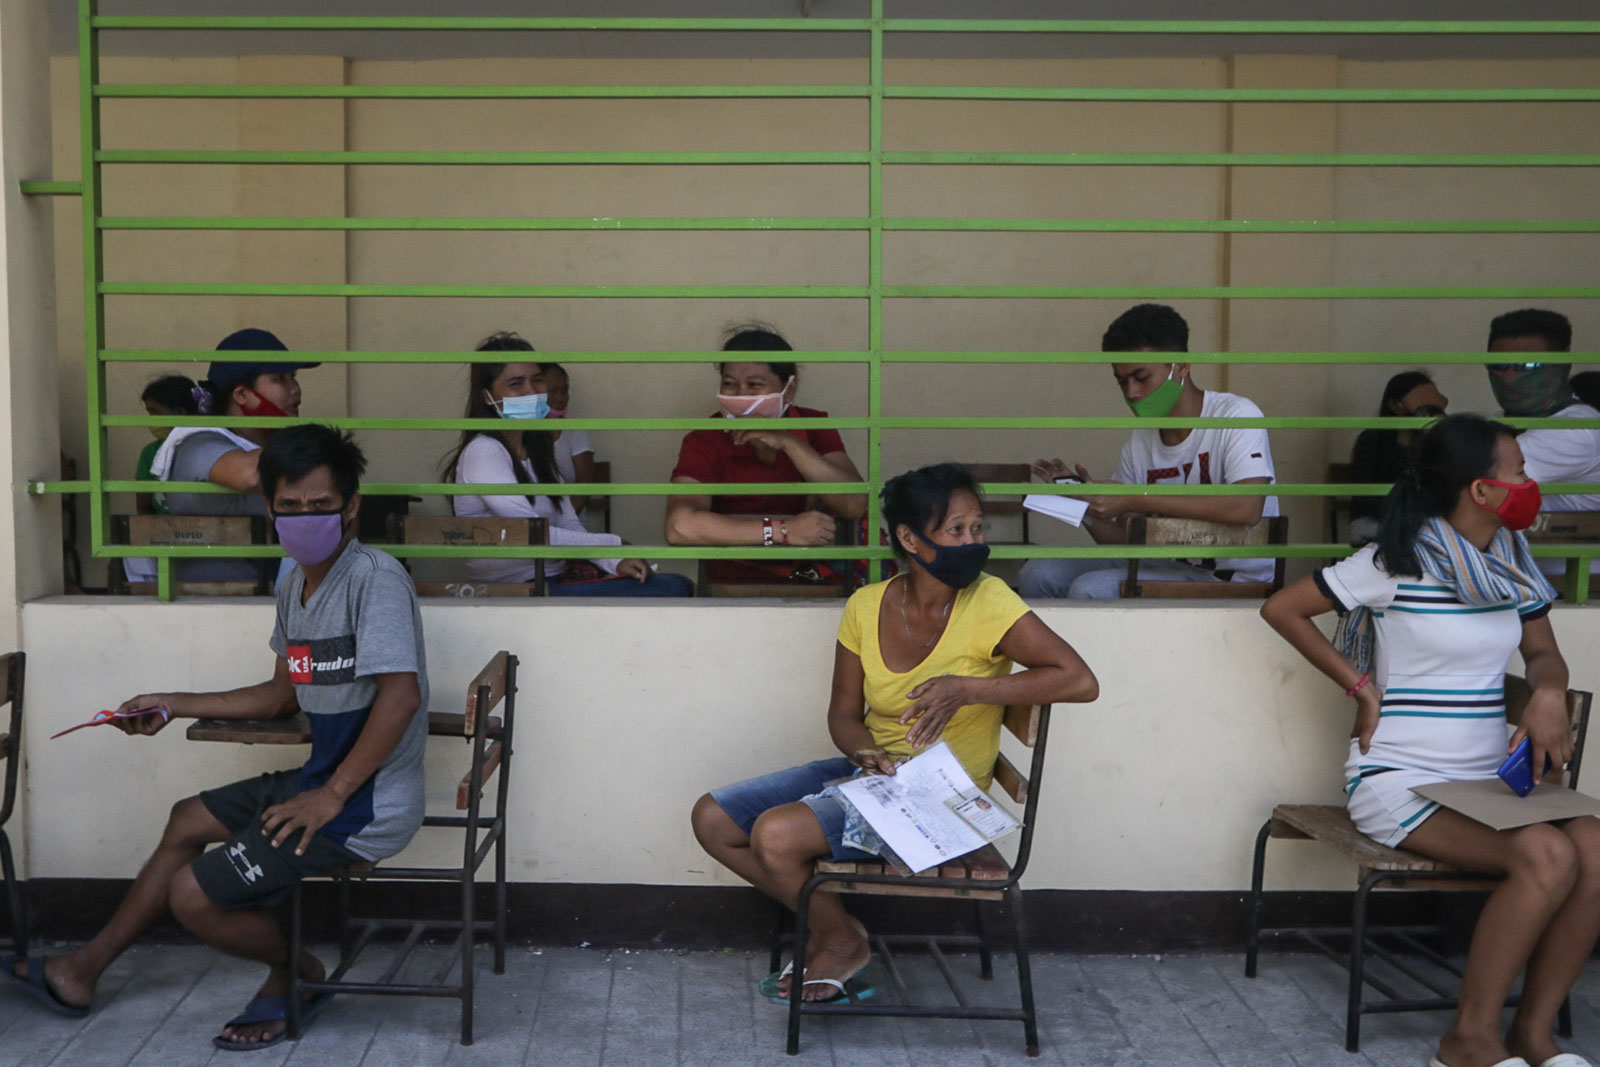 WAITING. Residents of Baseco Compound wait in line for their financial assistance from the government's emergency subsidy program distributed by DSWD at the Baseco Elementary School in Tondo, Manila on May 2, 2020. Photo by KD Madrilejos/Rappler 